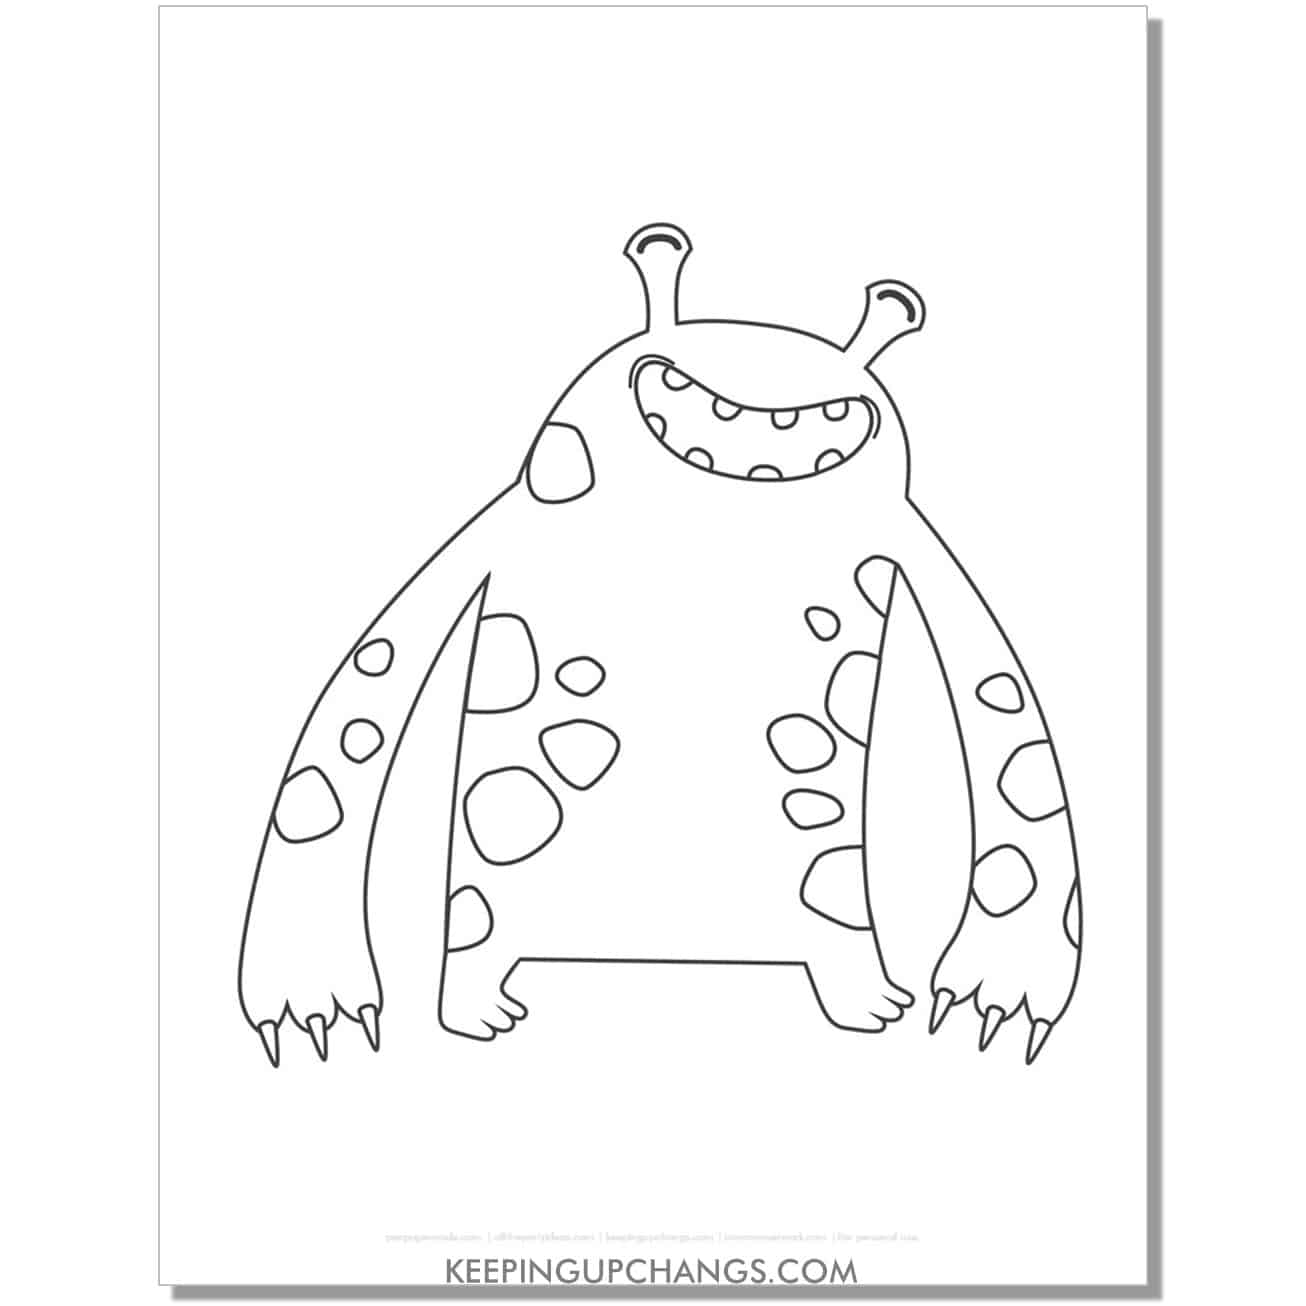 free alien monster with spots coloring page.